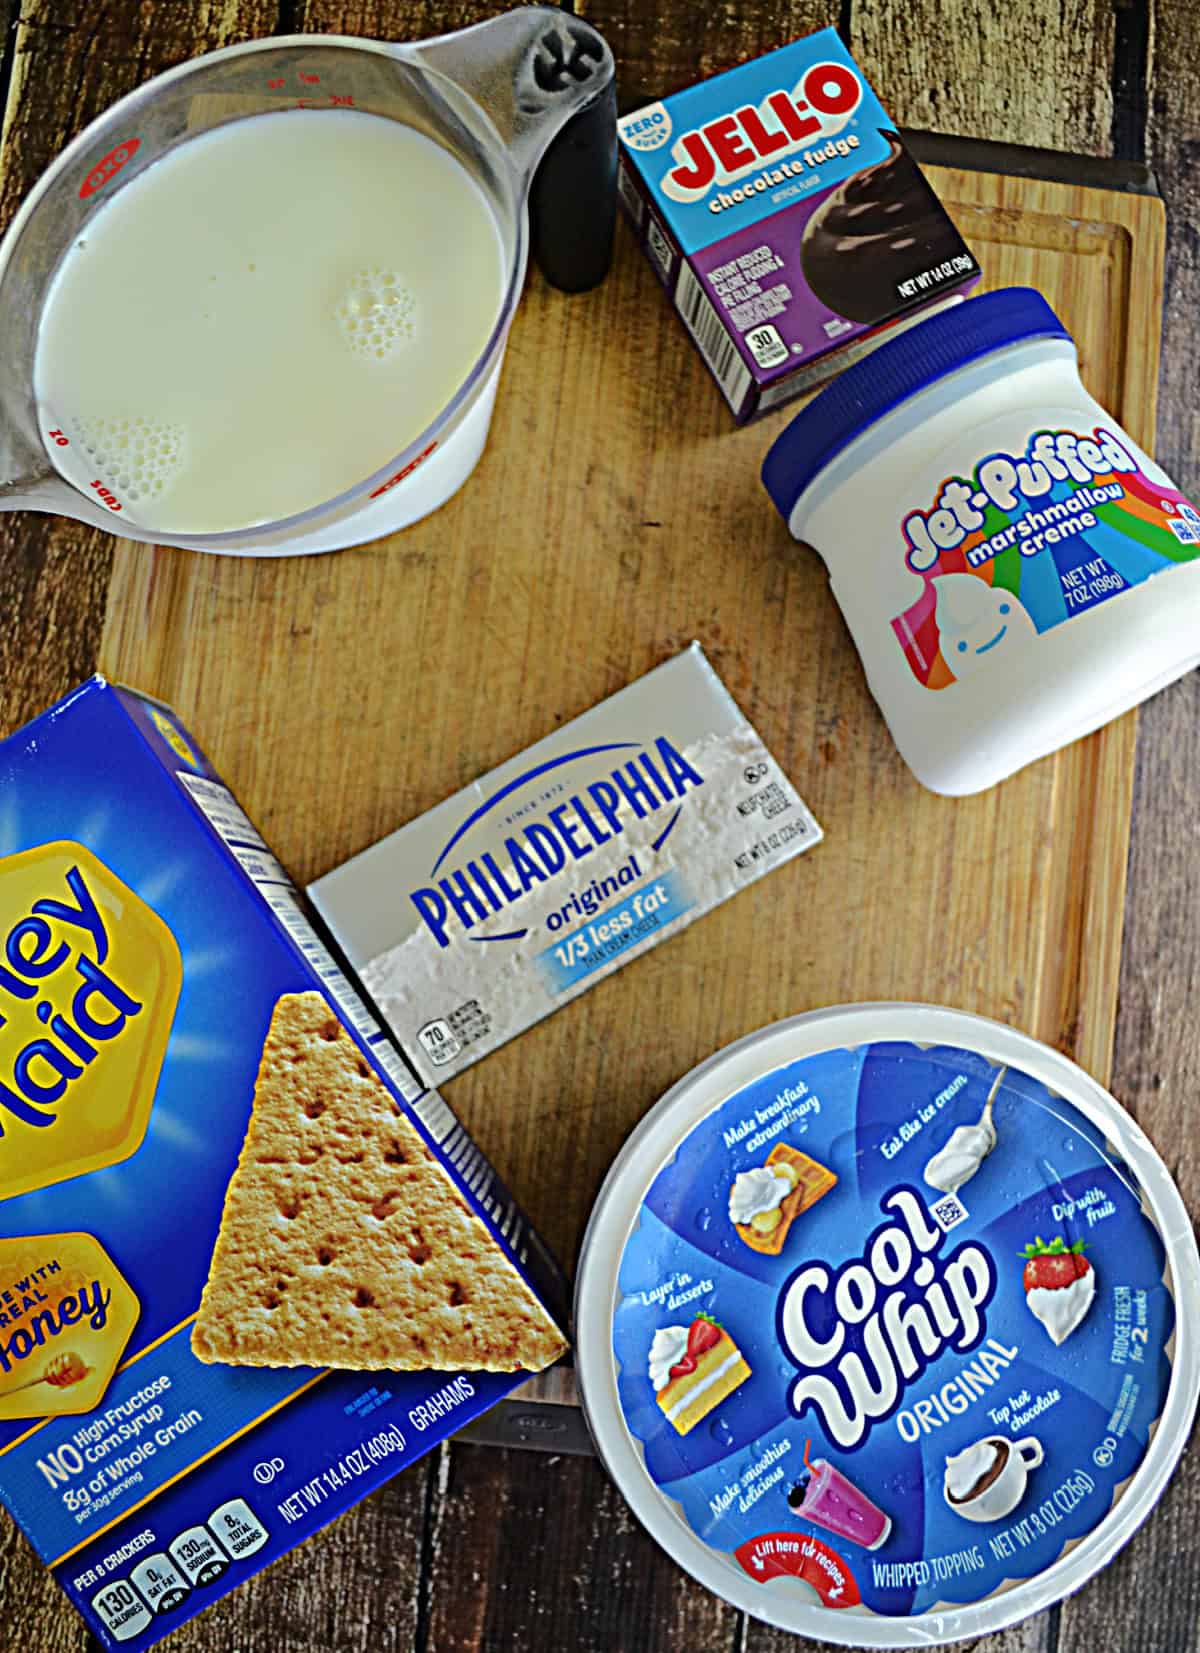 Ingredients for making Frozen S'mores.